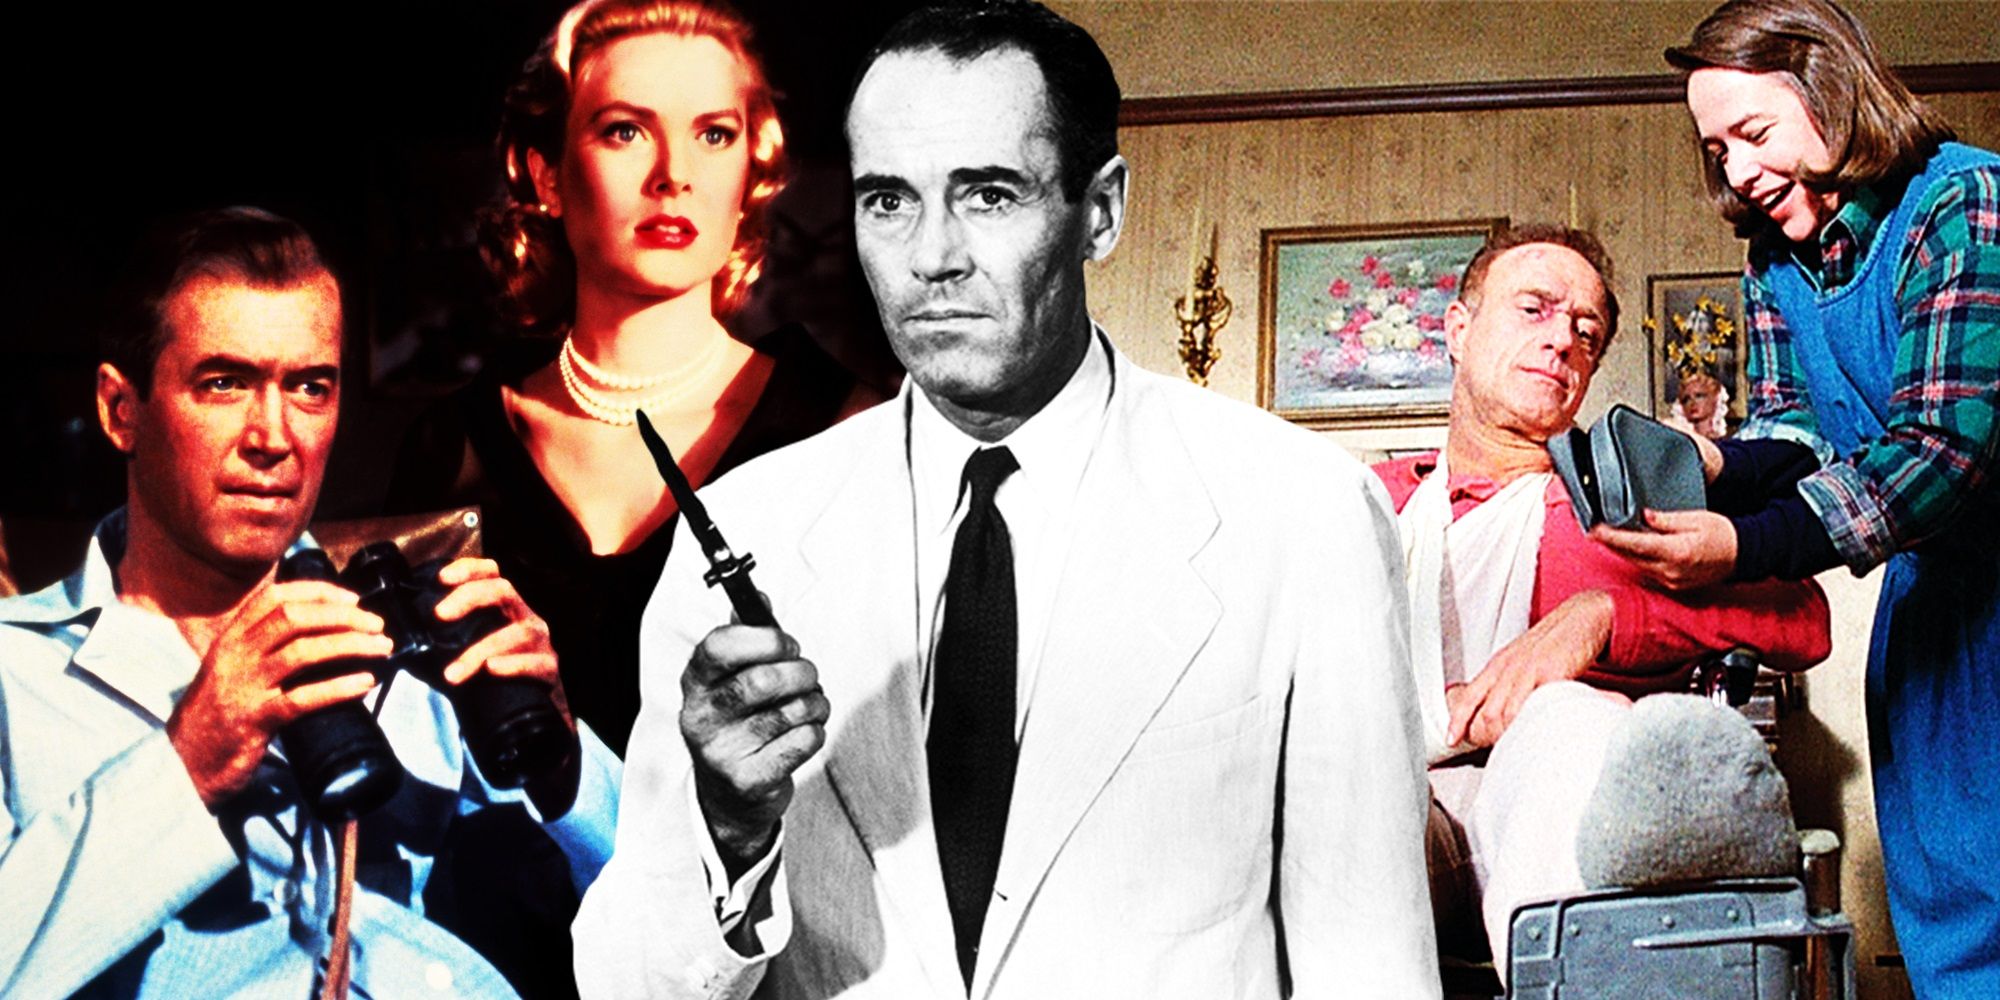 Collage of James Stewart in Rear Window, Henry Fonda in 12 Angry Men, and Kathy Bates and James Caan in Misery